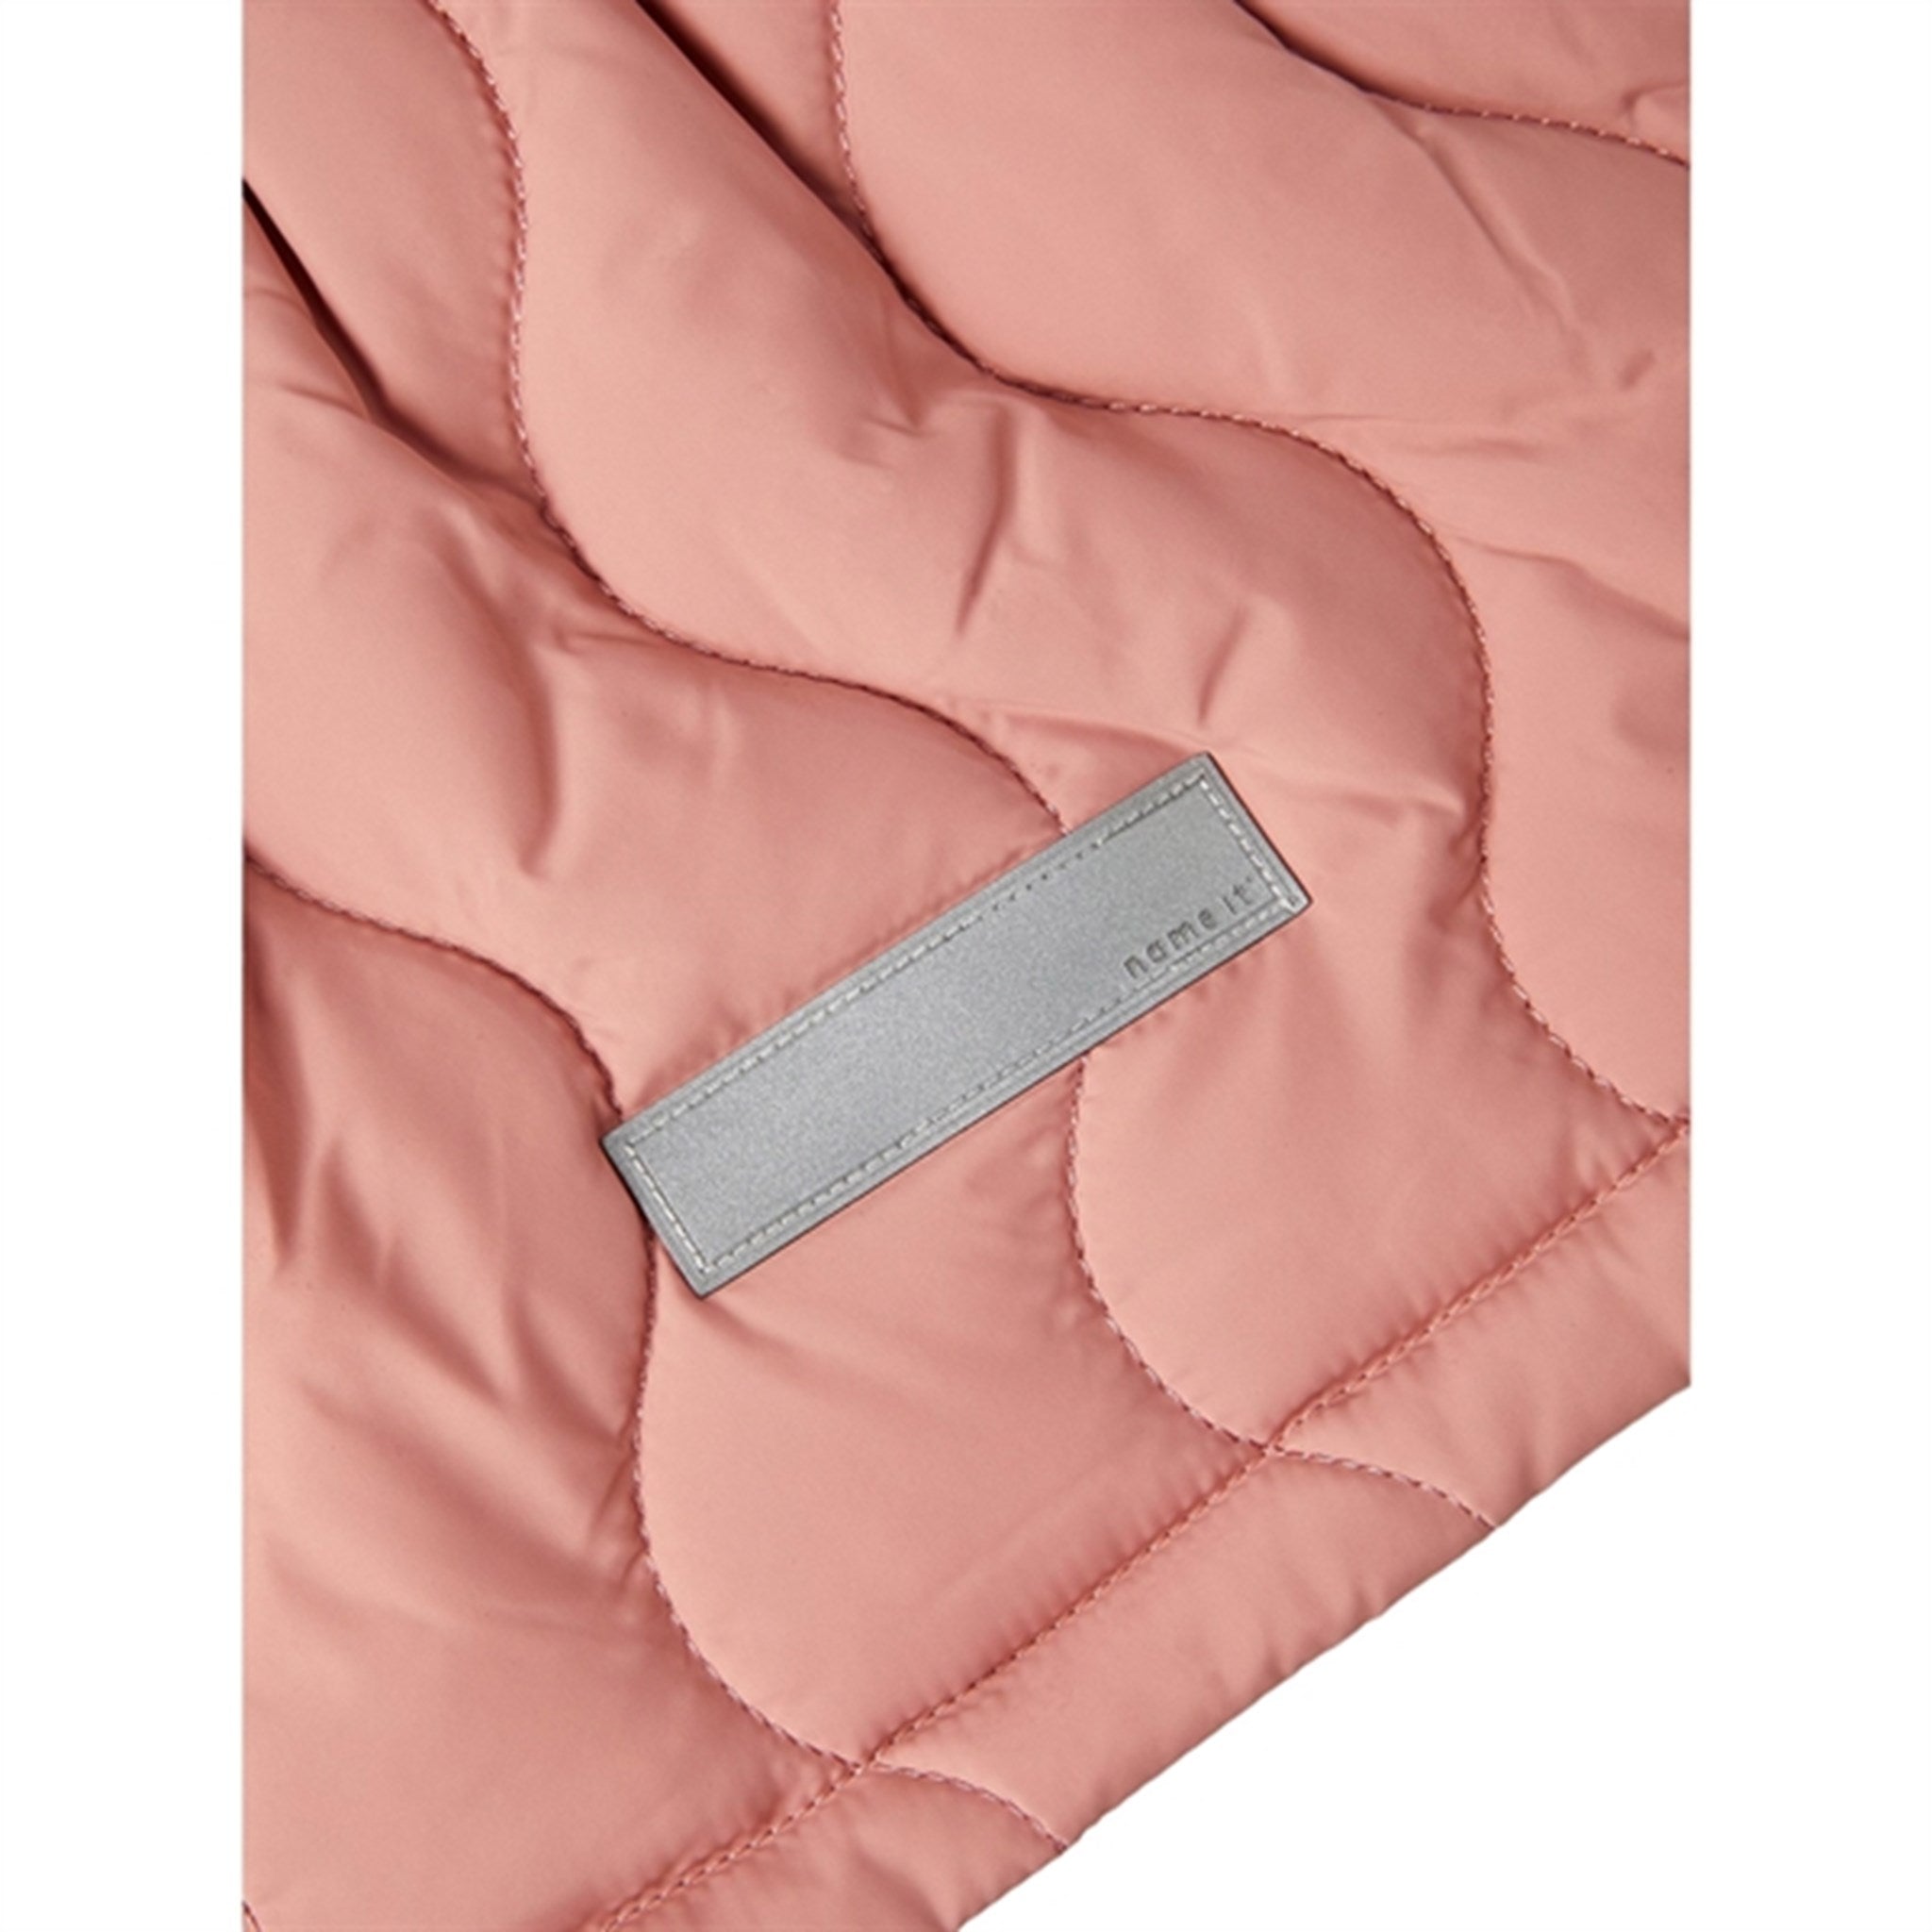 Name it Old Rose Mars Quilted Jacket 4